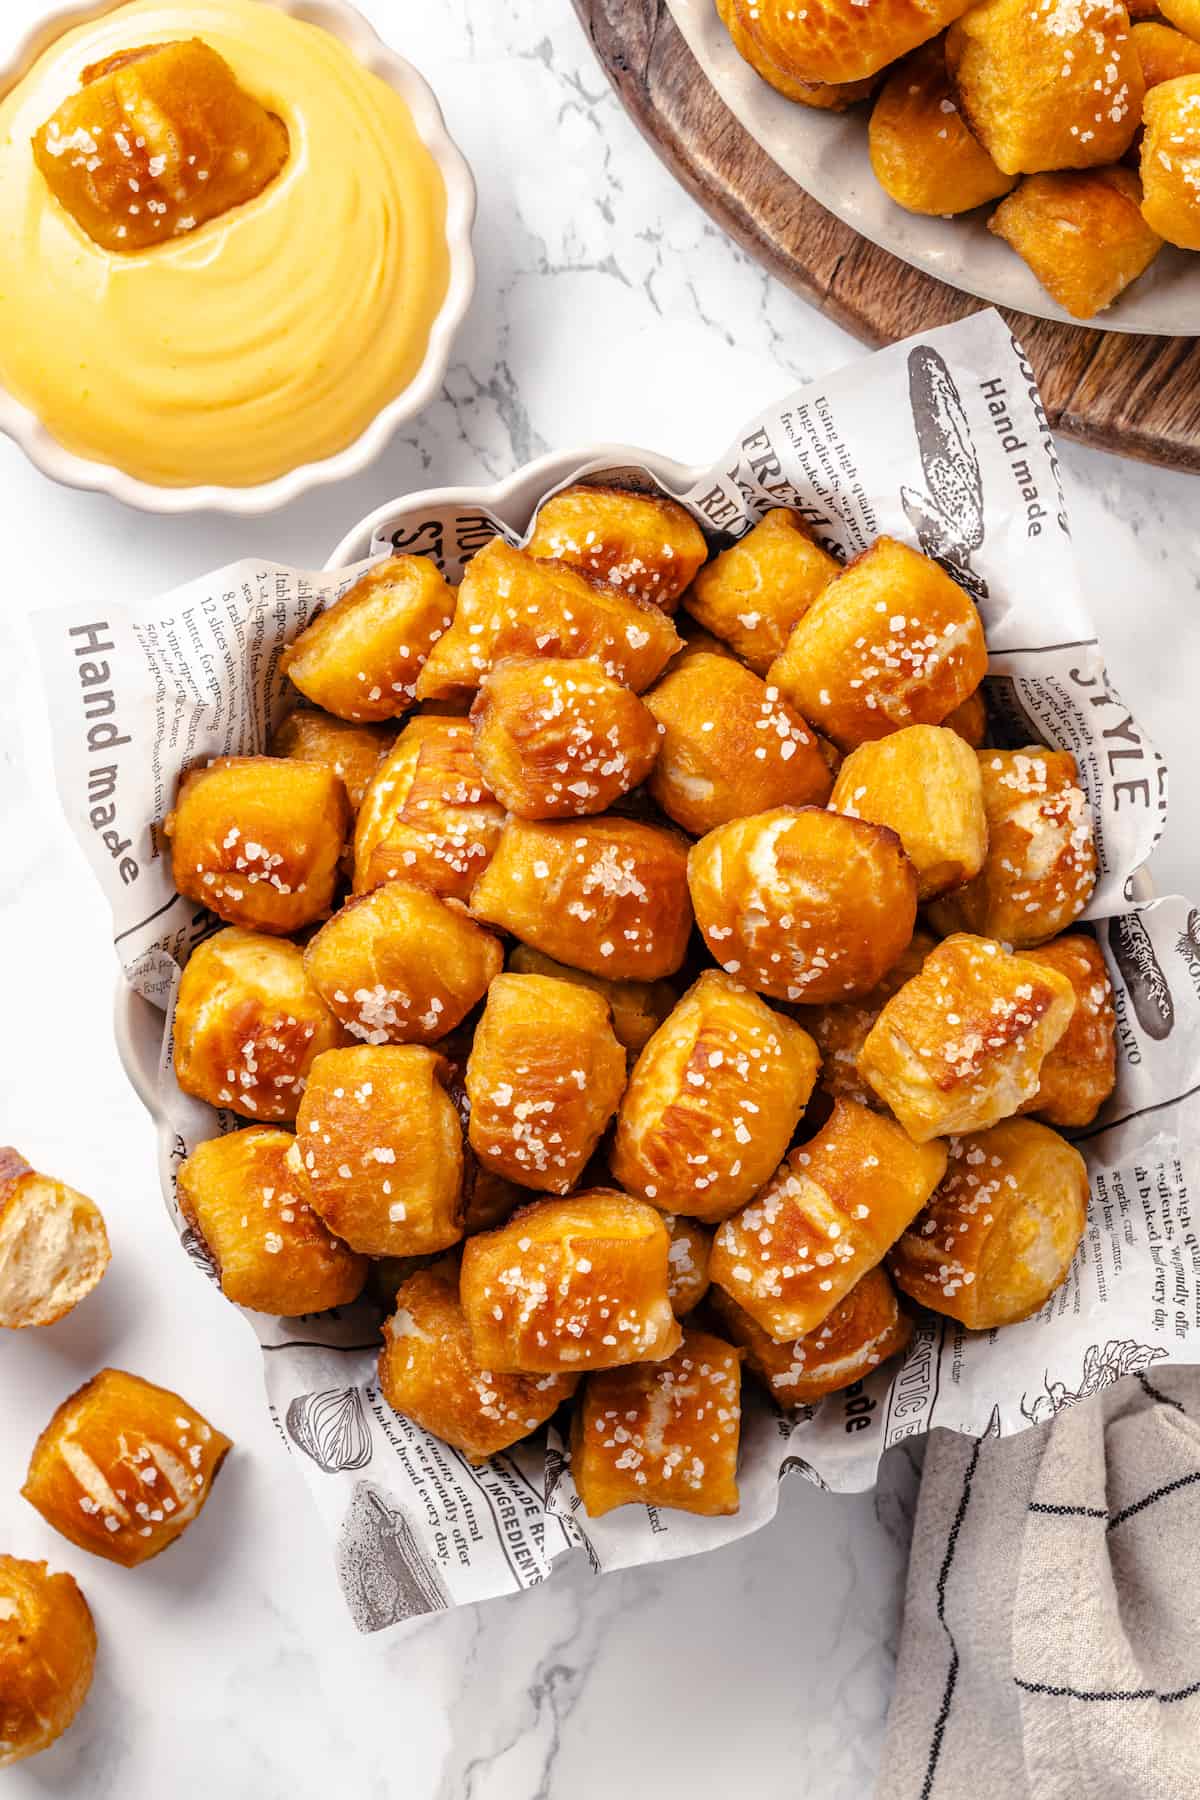 Basket of pretzel bites with bowl of cheese dip